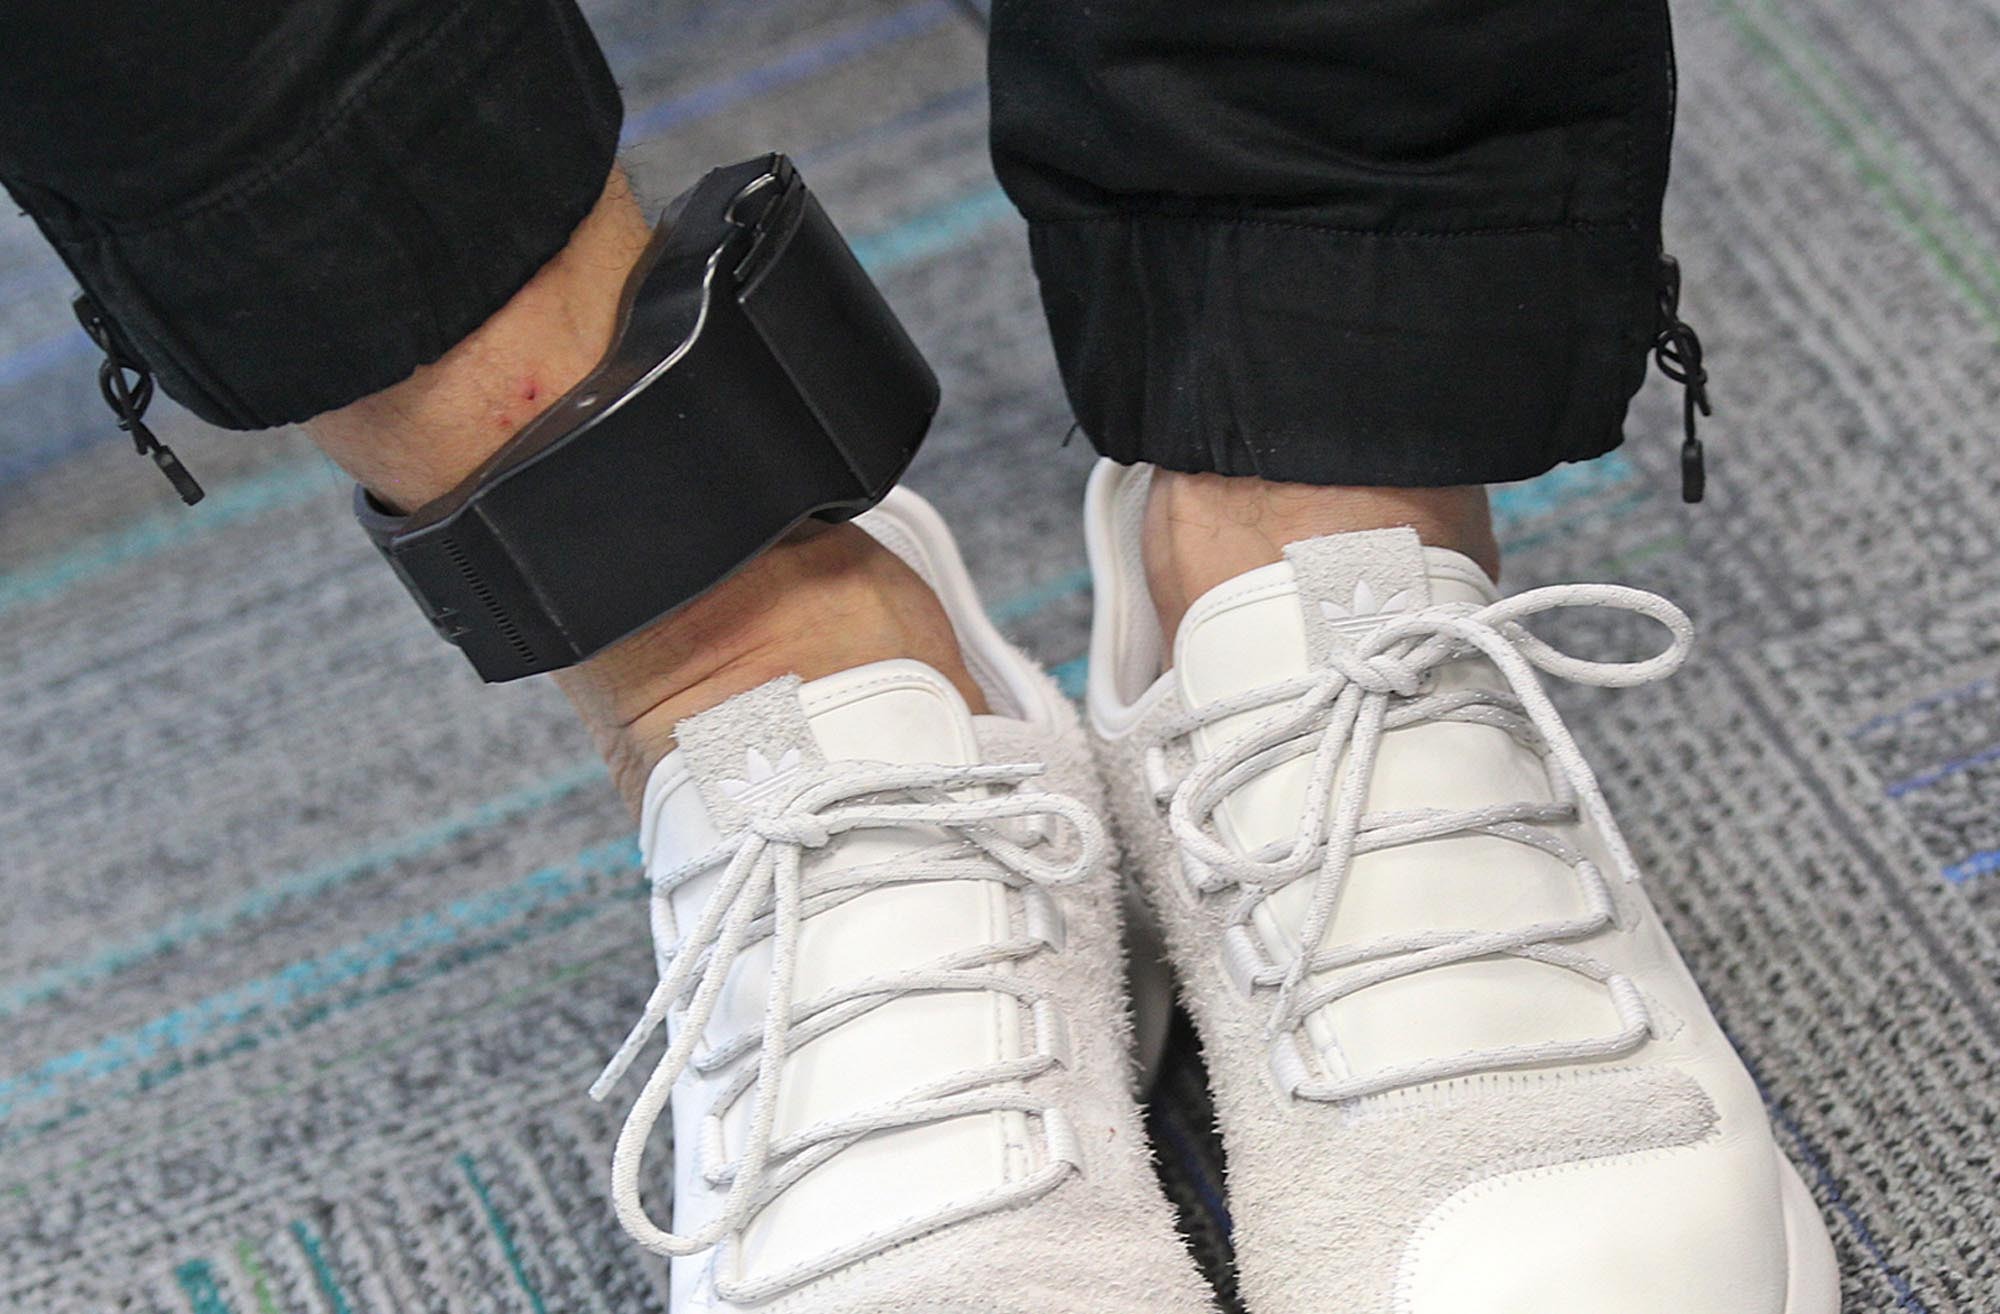 PHOTO: A government ankle monitor.